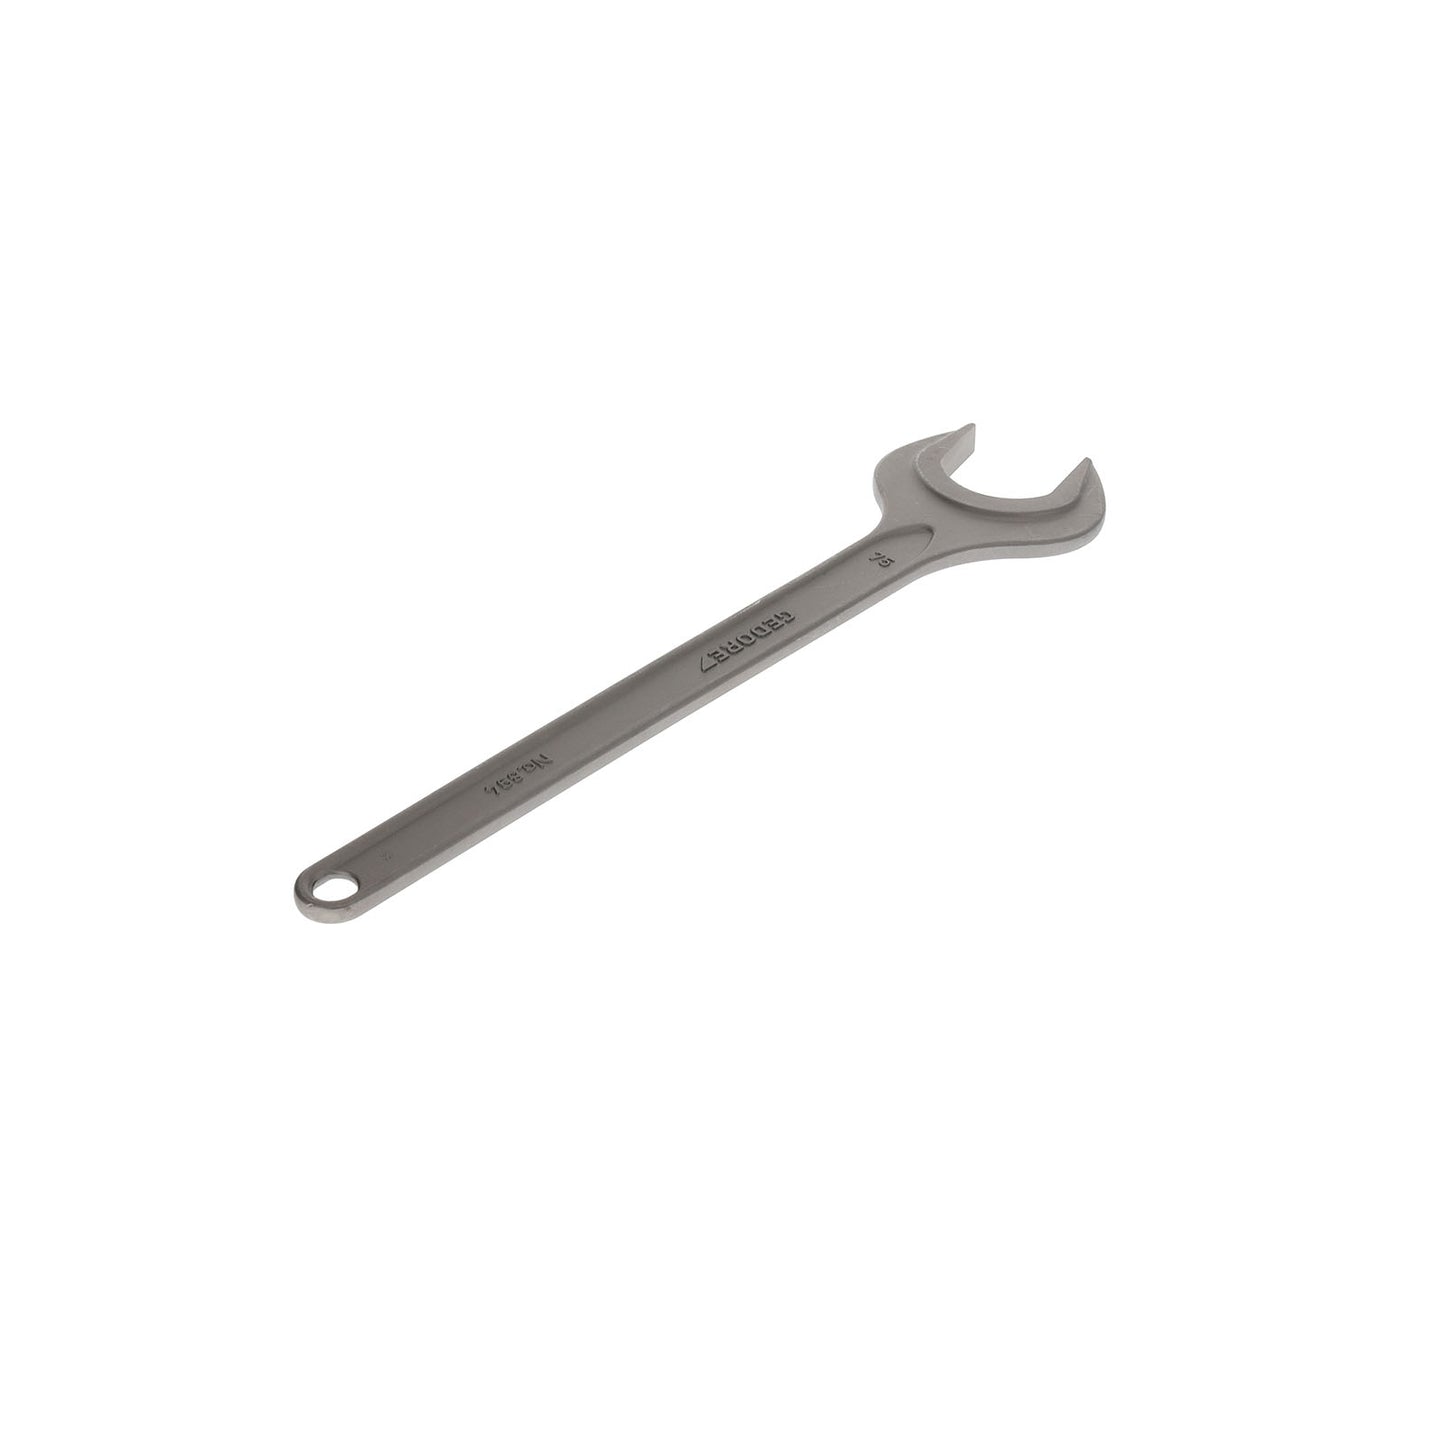 GEDORE 894 75 - 1 Open End Wrench, 75mm (6577780)